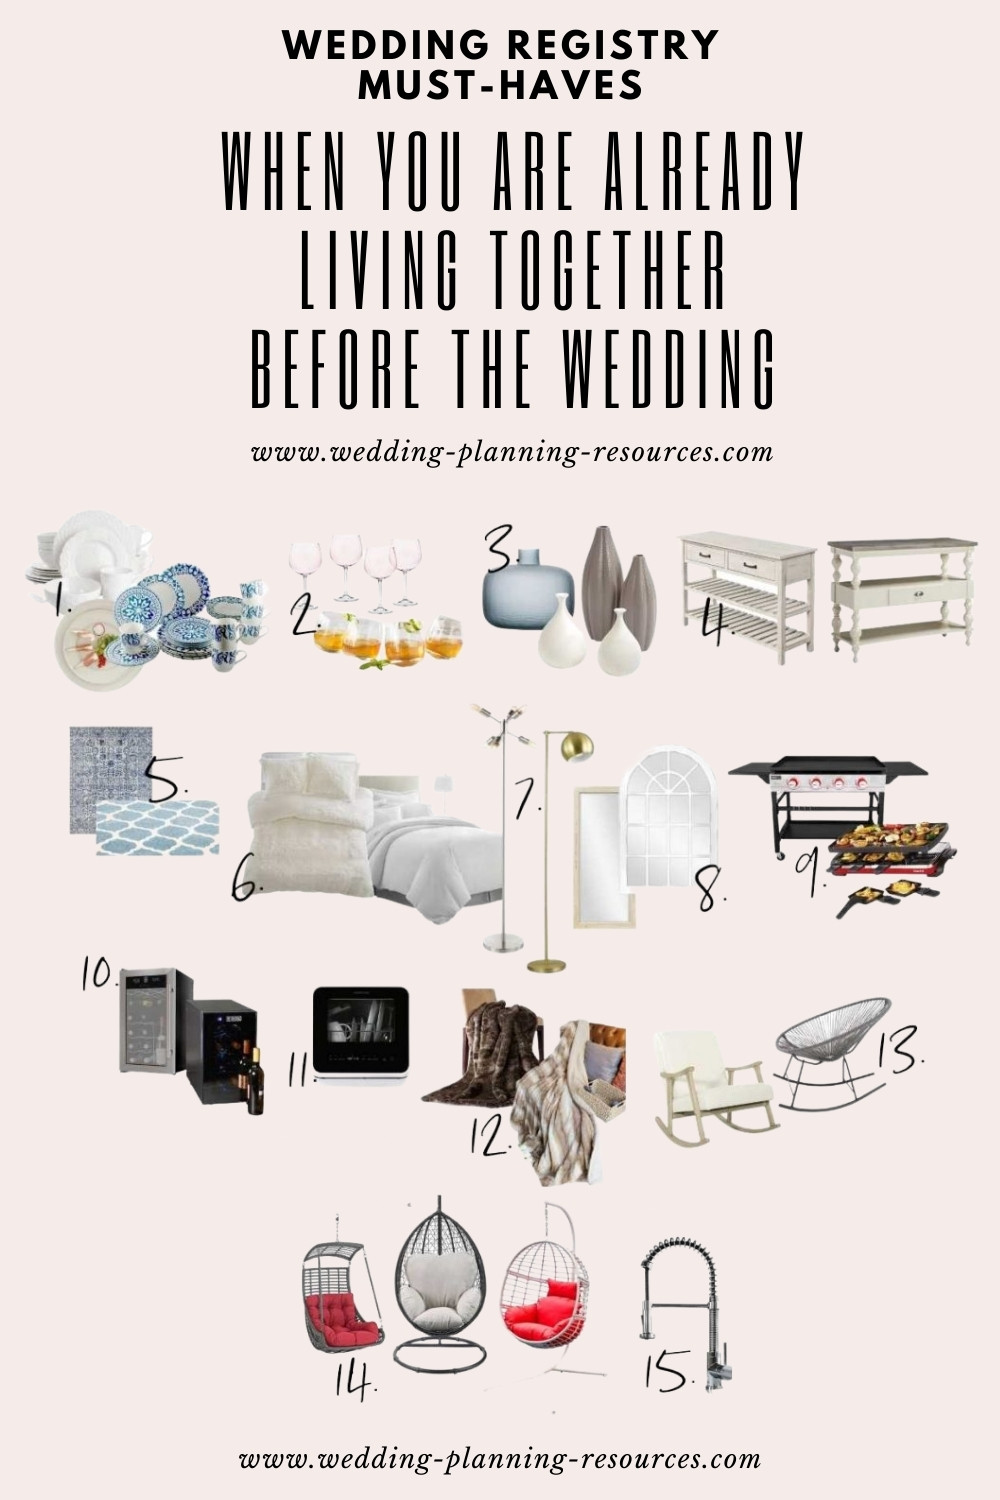 https://www.peppermintandco.ca/wp-content/uploads/2020/11/living-together-before-the-wedding-wedding-registry.jpg